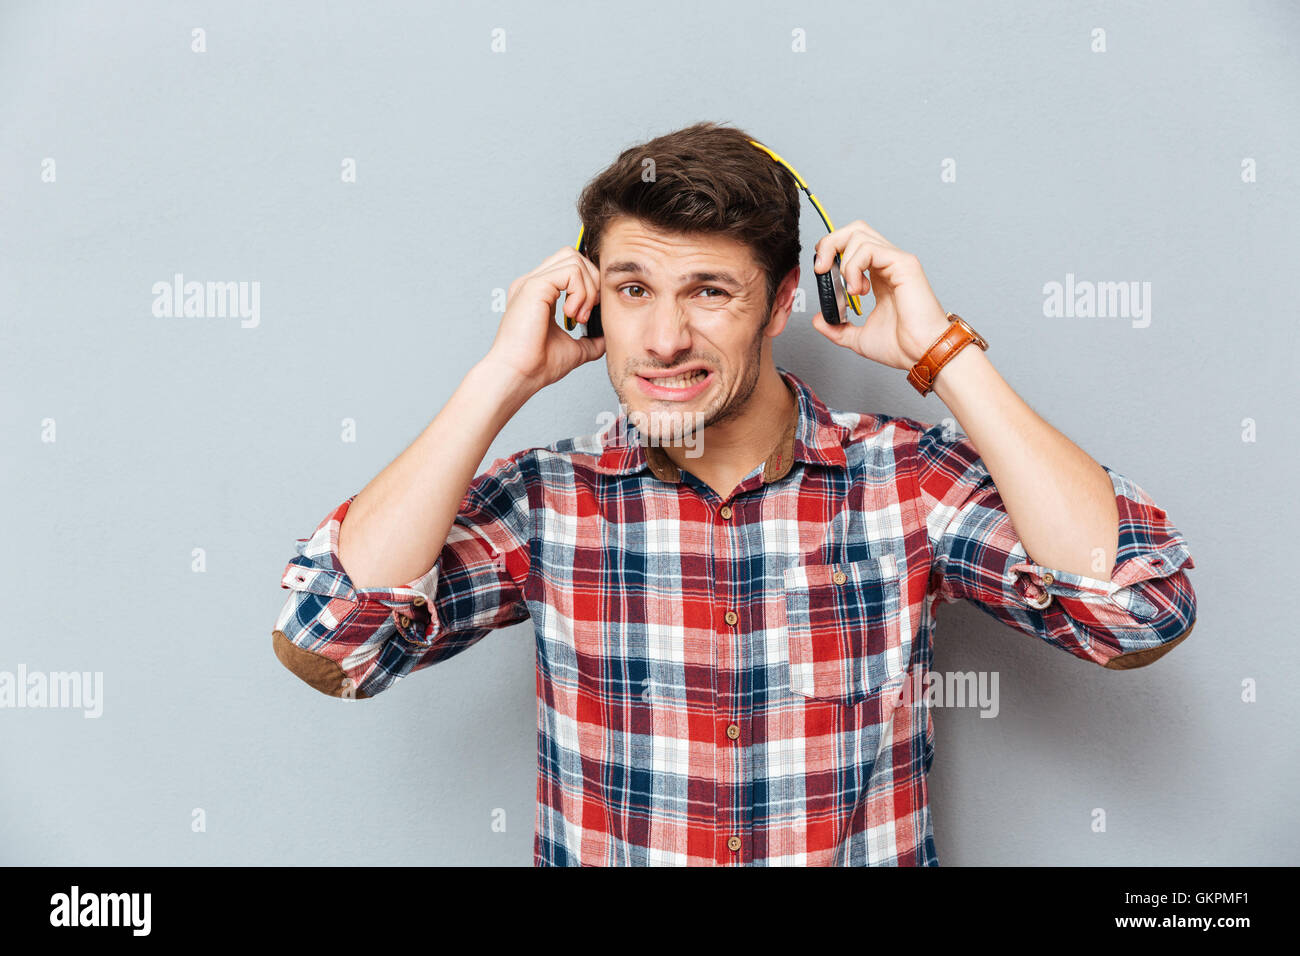 Embarrassed ·irritated young man in checkered shirt taking off headphones over grey background Stock Photo